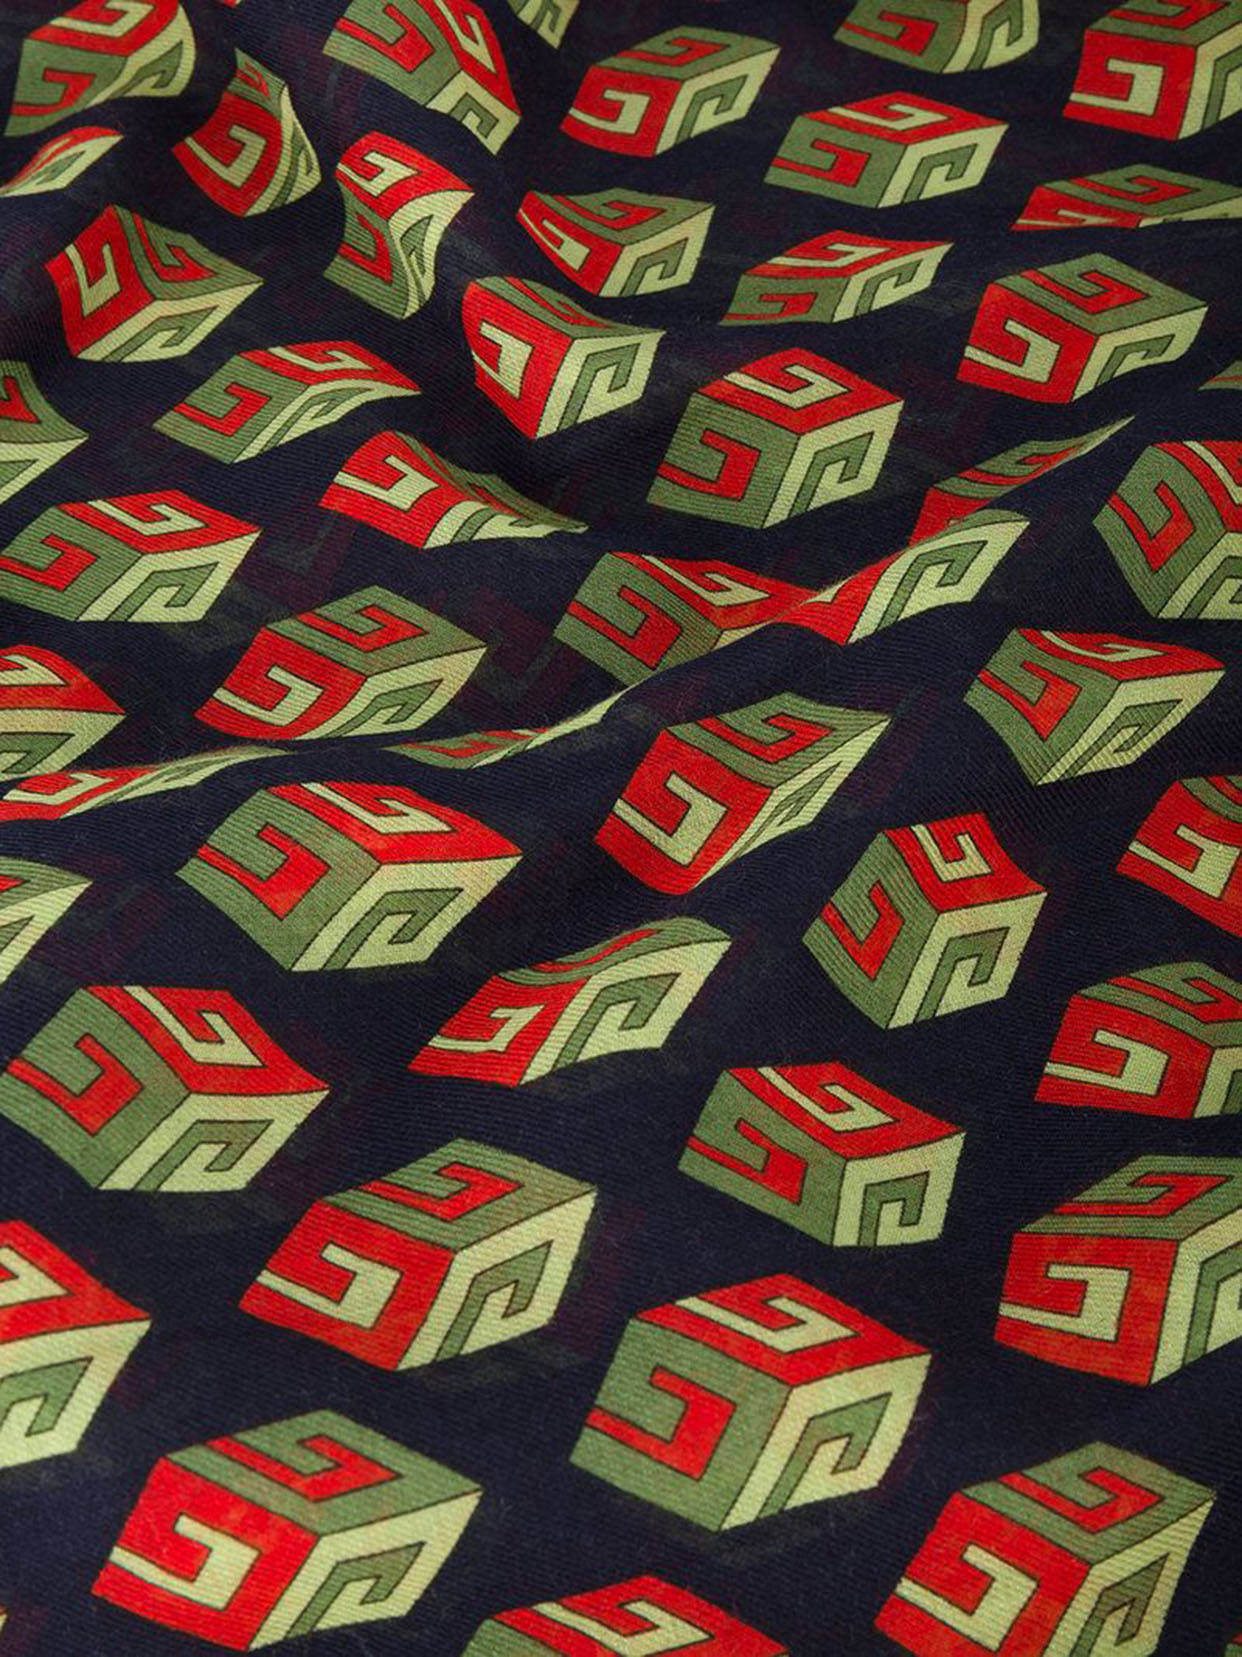 Gucci Pattern Cube Icons Wallpaper